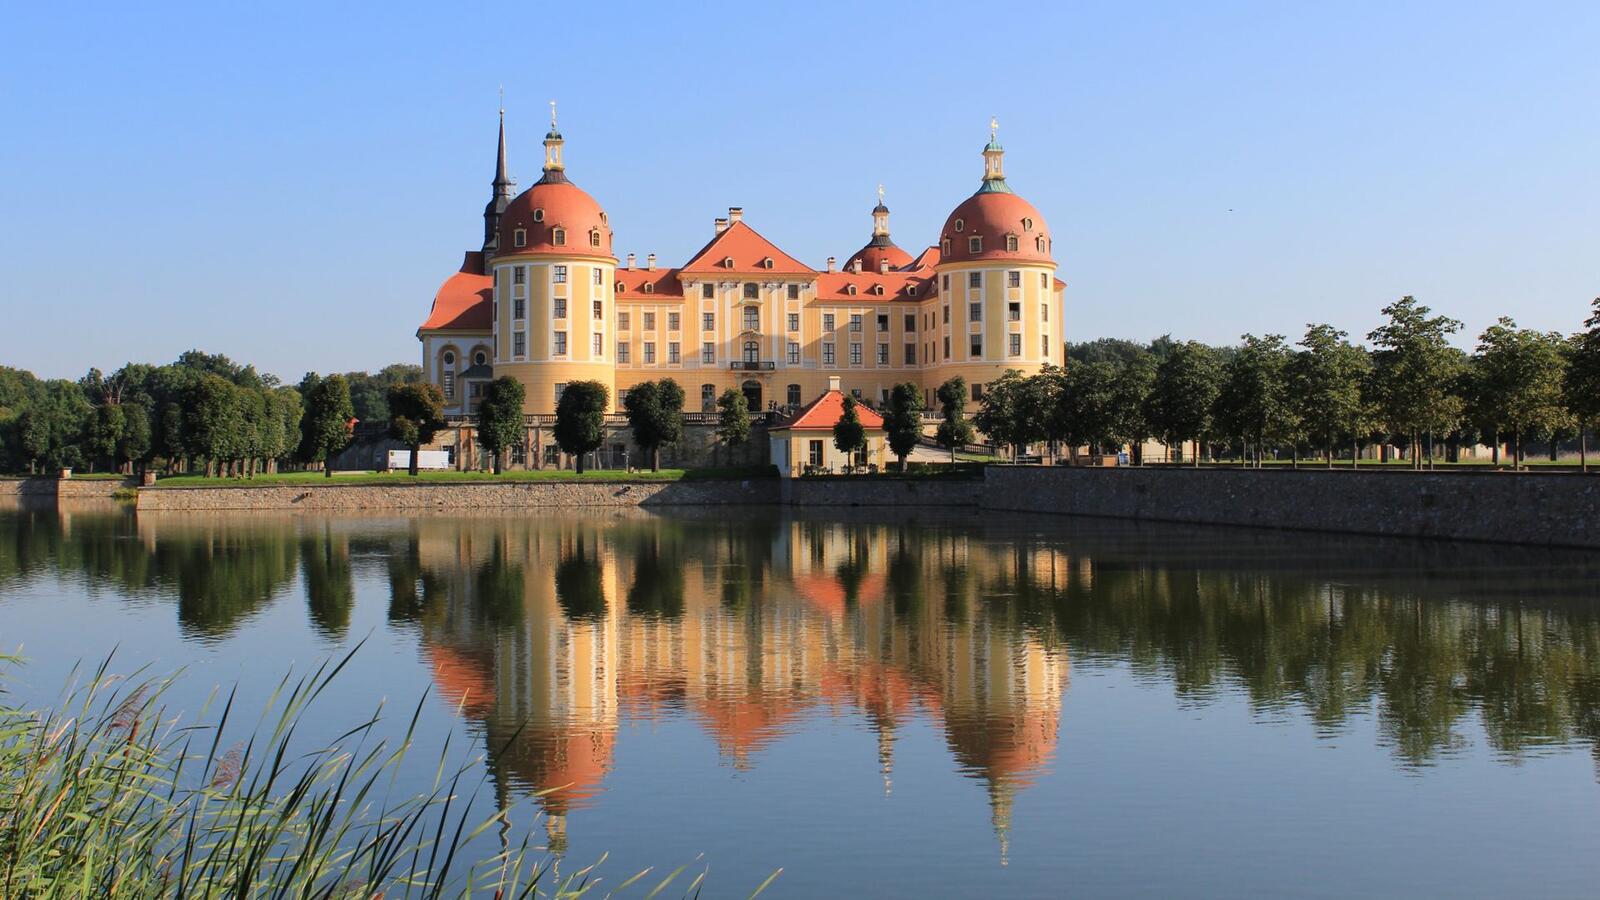 Free photo A stunning palace in Germany on the banks of a river